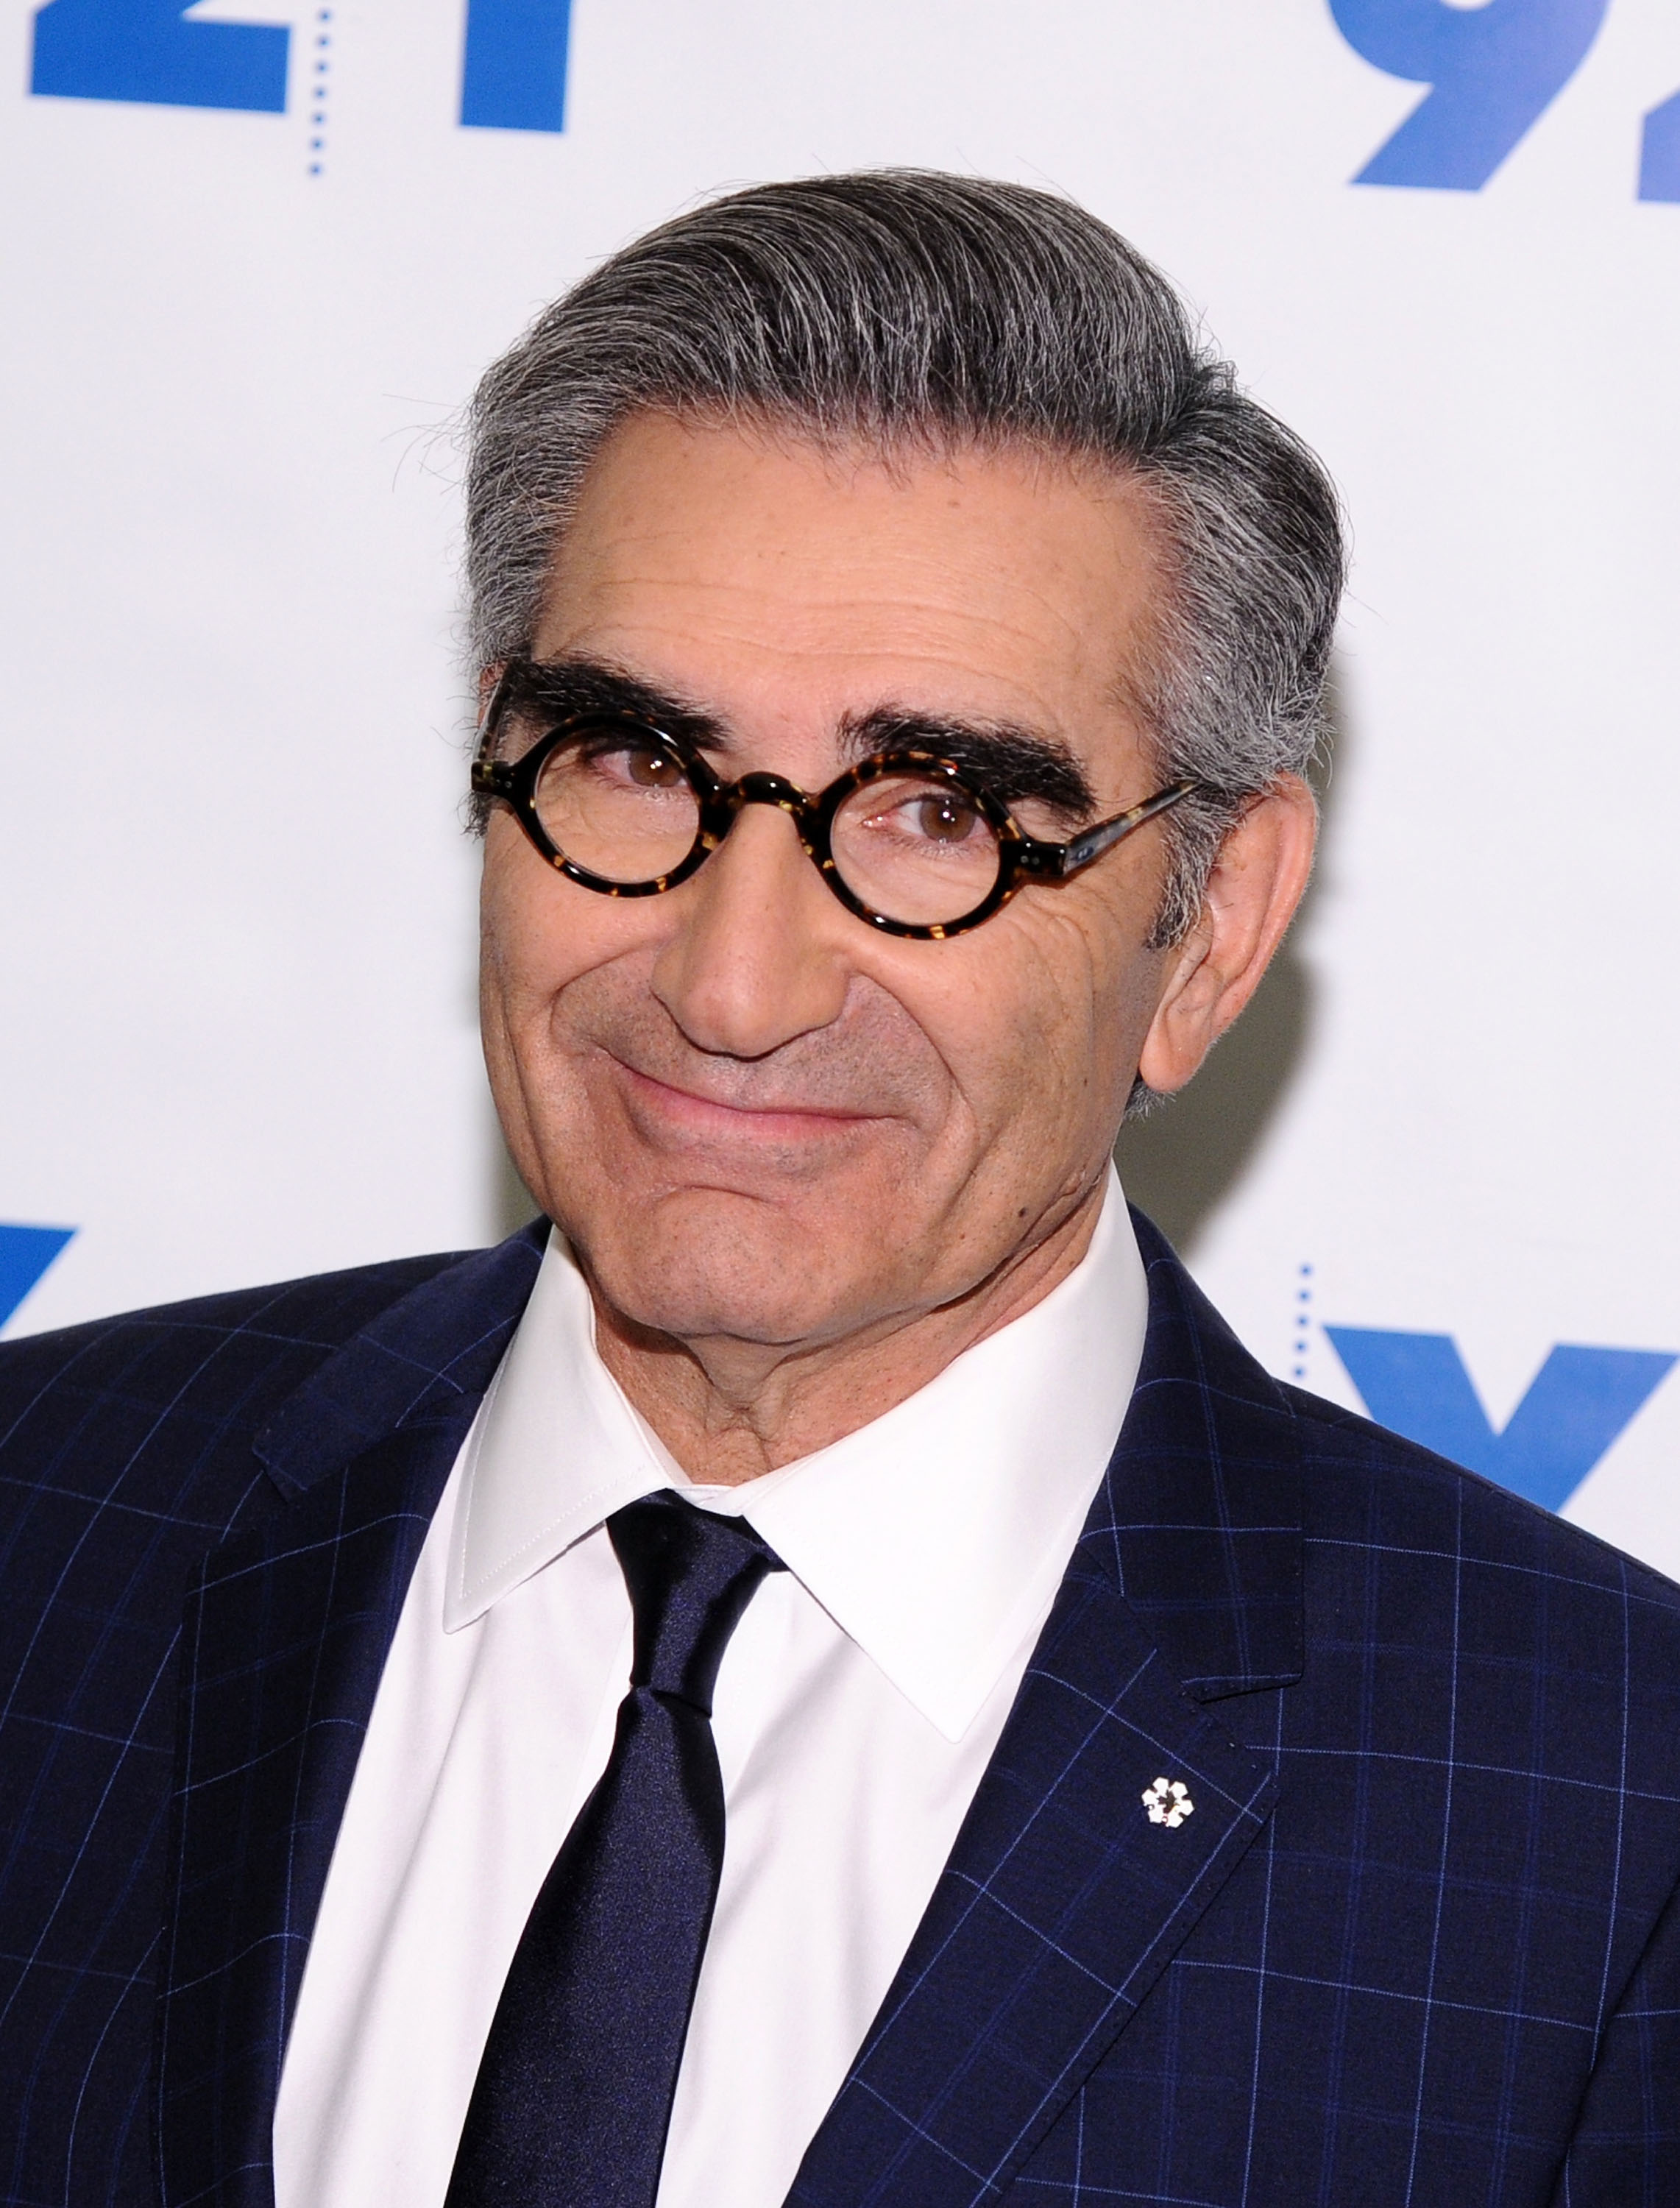 Eugene Levy attends 92nd Street Y Presents "Schitt's Creek" on March 14, 2016 in New York City.